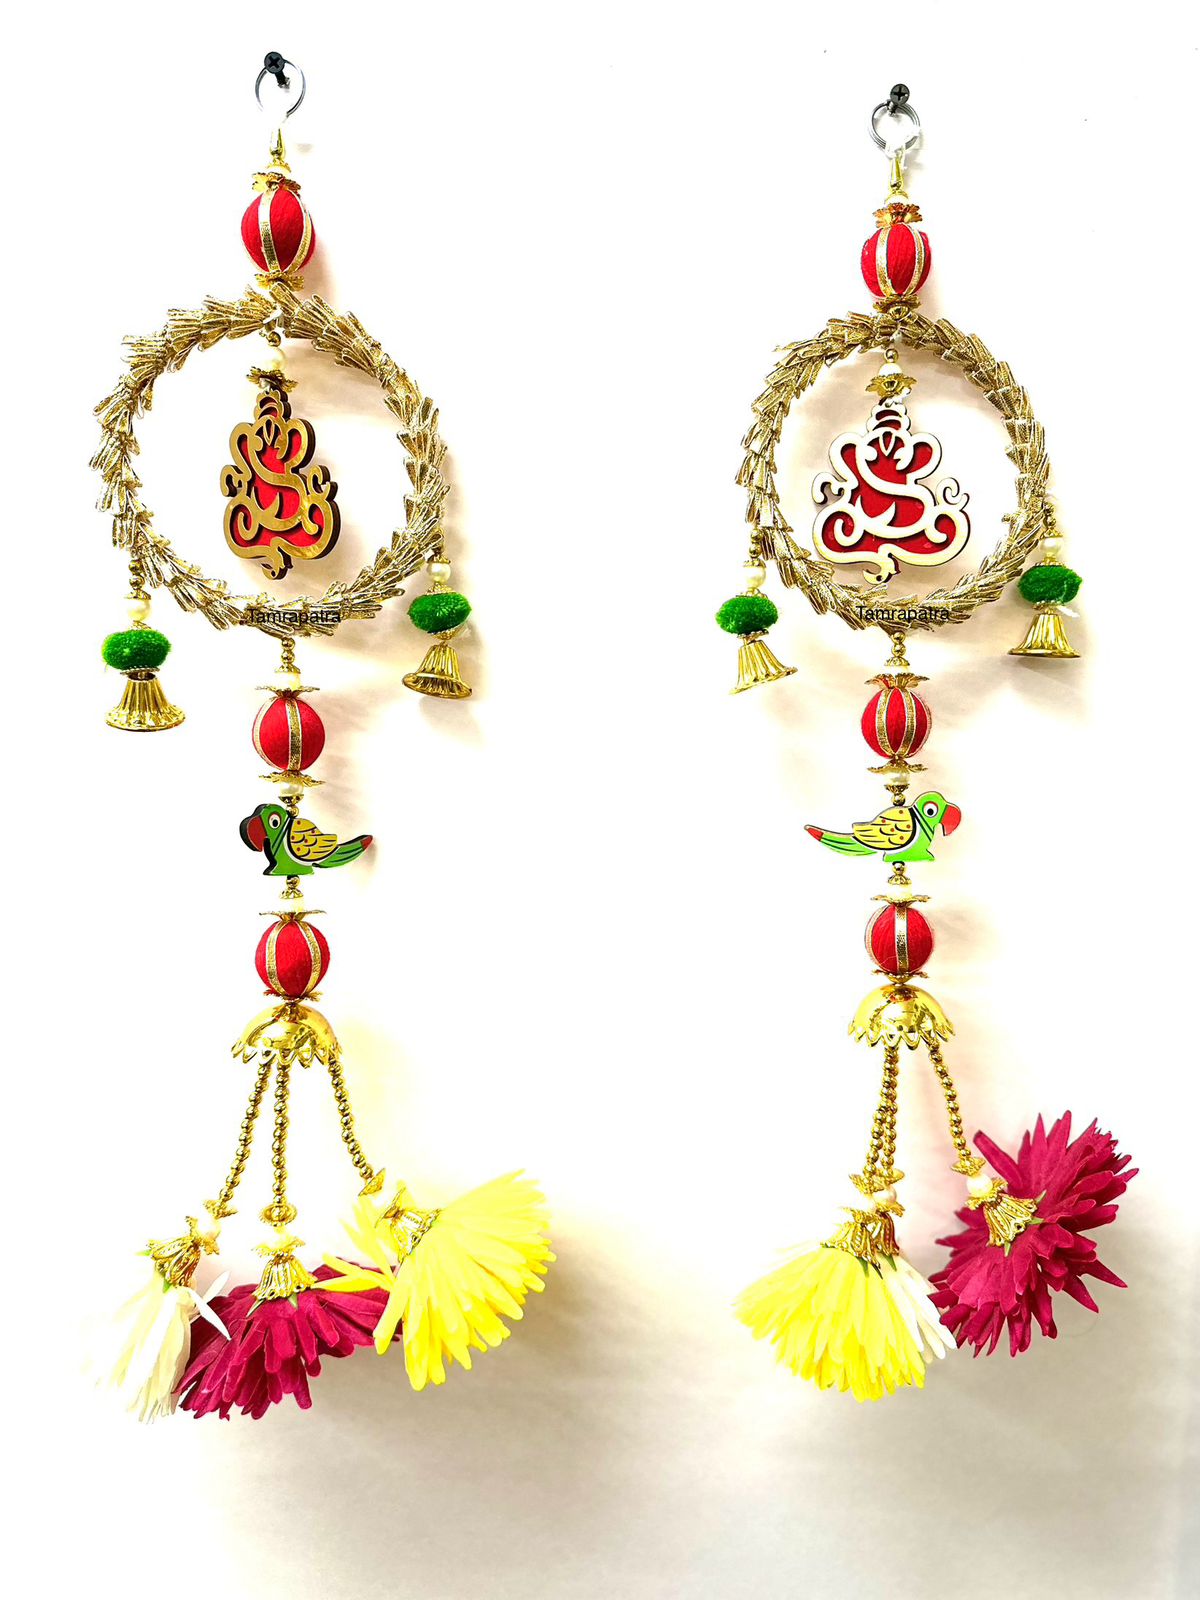 Hangings Ganesh In Ring With Parrot Floral Designs New Arrival From Tamrapatra